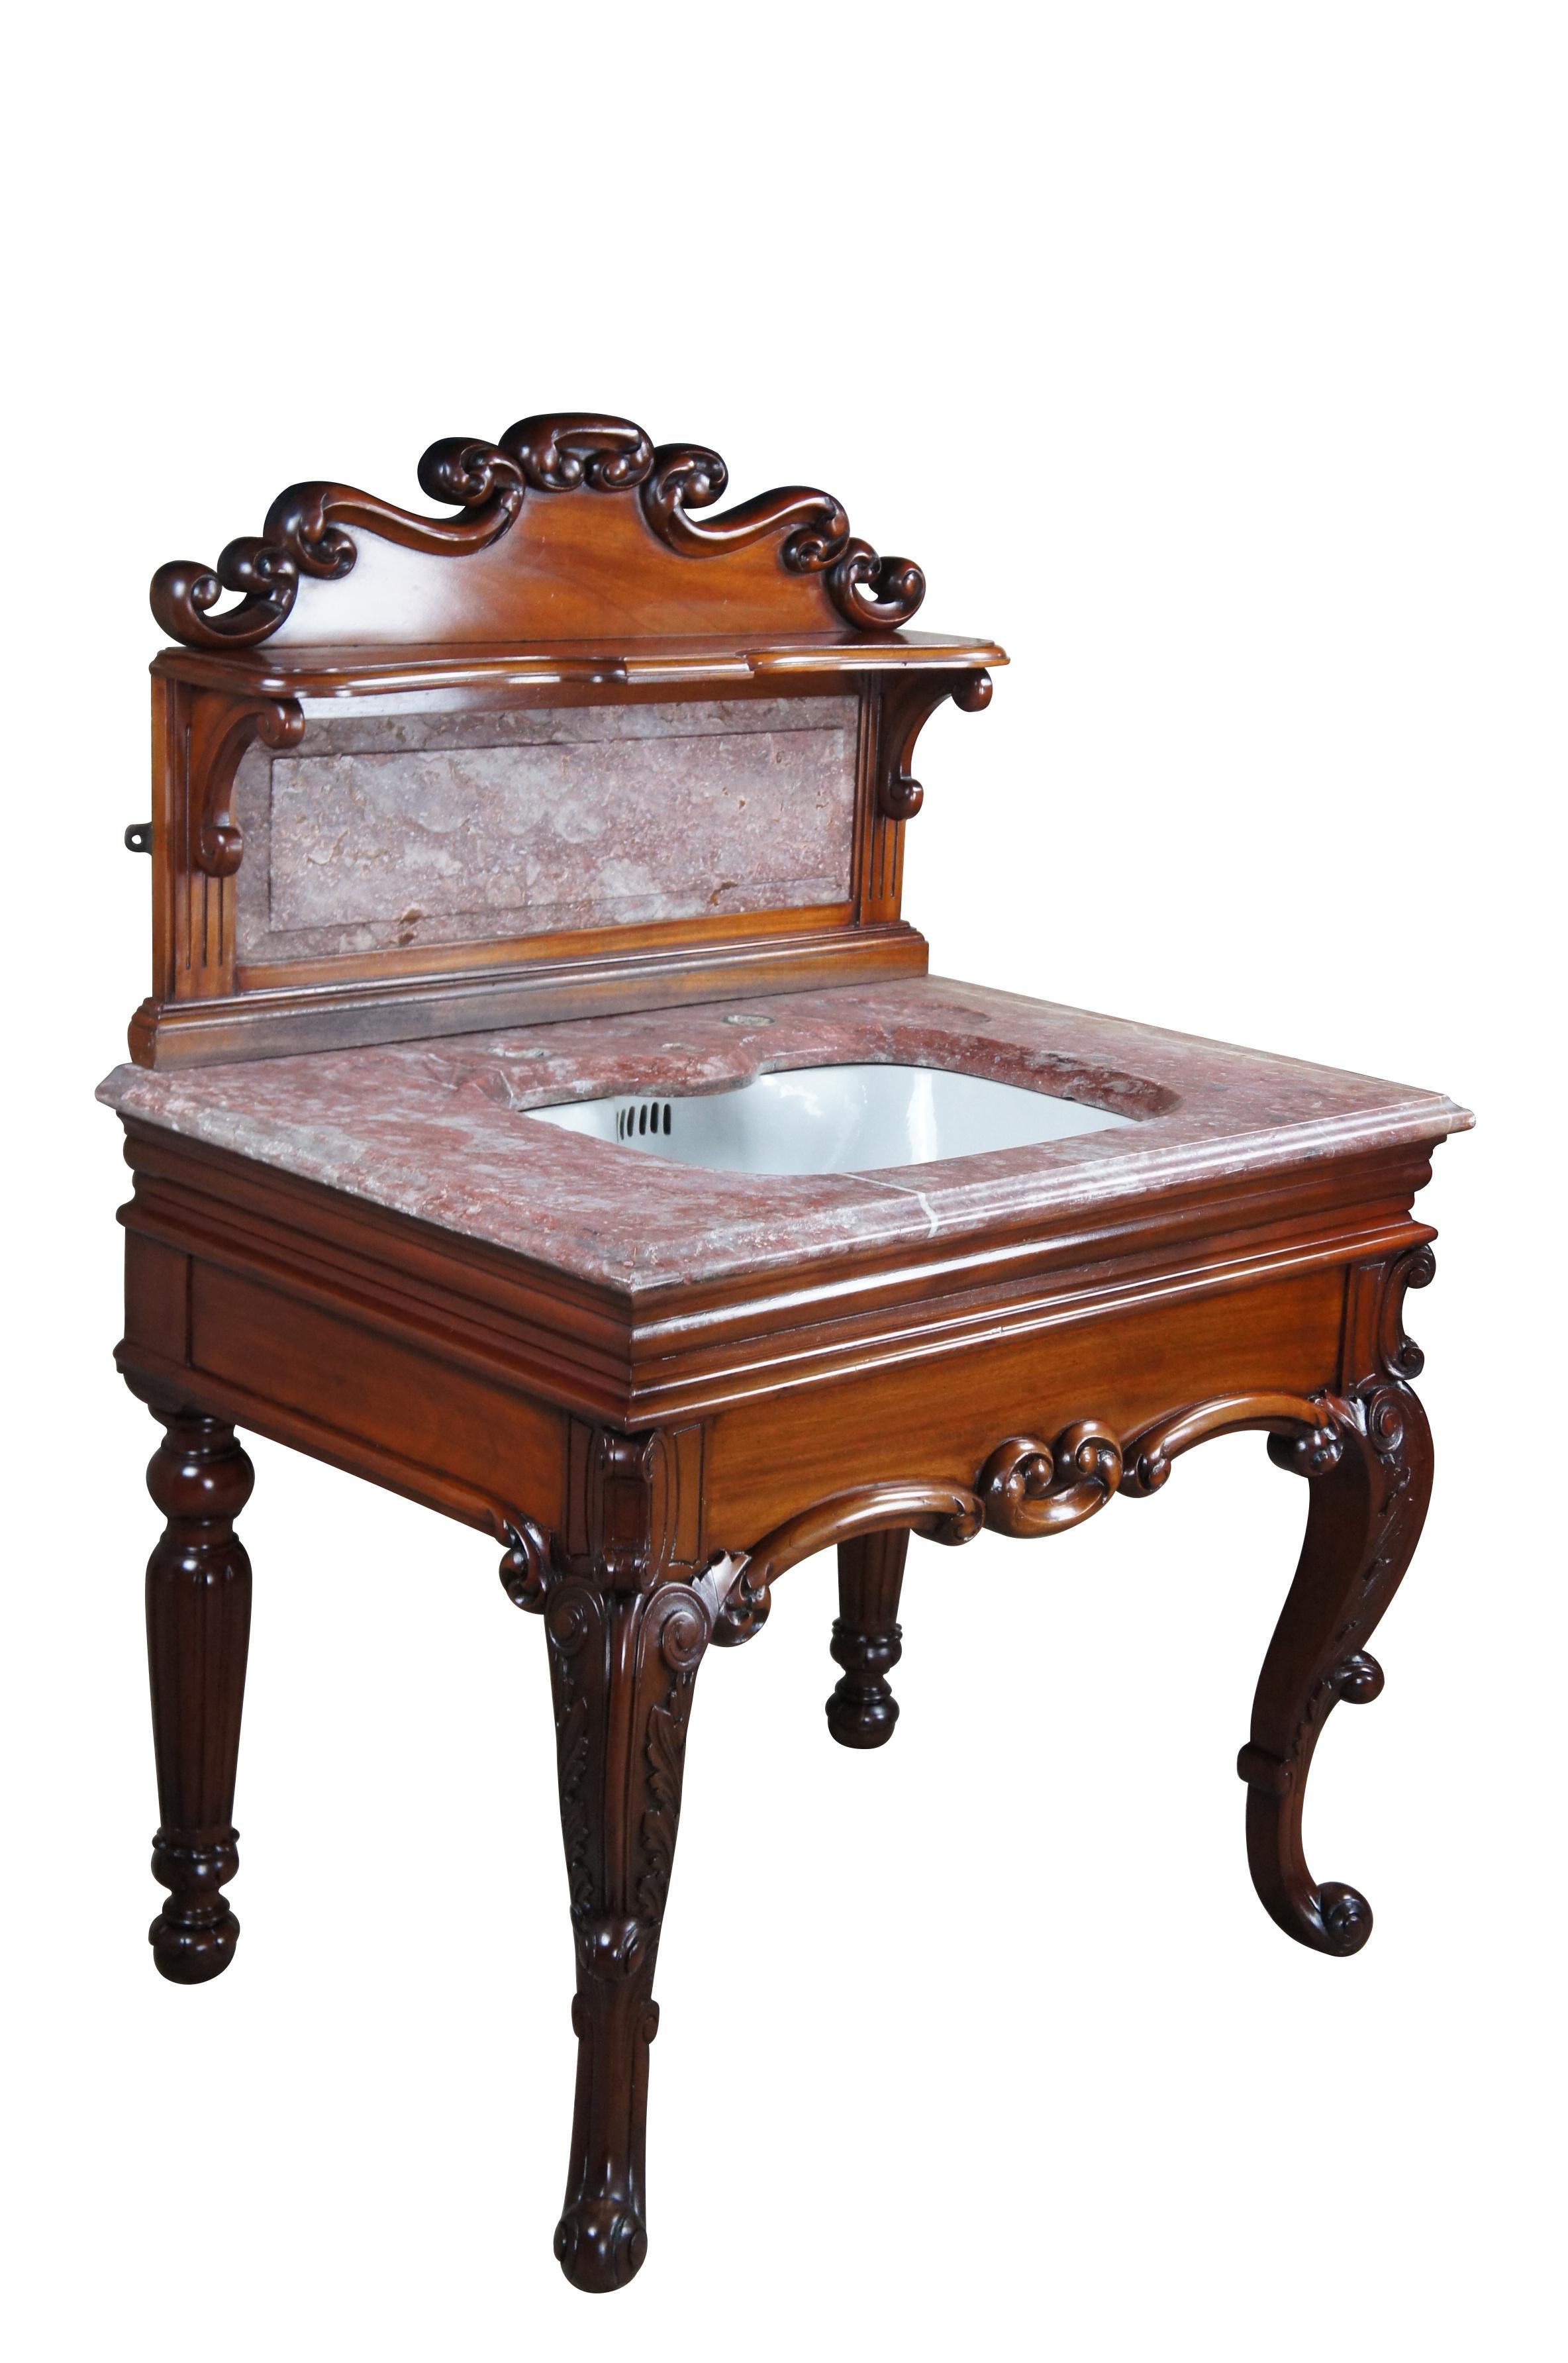 An exquisite Victorian Era bathroom vanity.  Features a red and white vein marble top with scalloped soap holders and porcelain sink basins by John Shanks (Britain).  The spectacular mahogany base features  